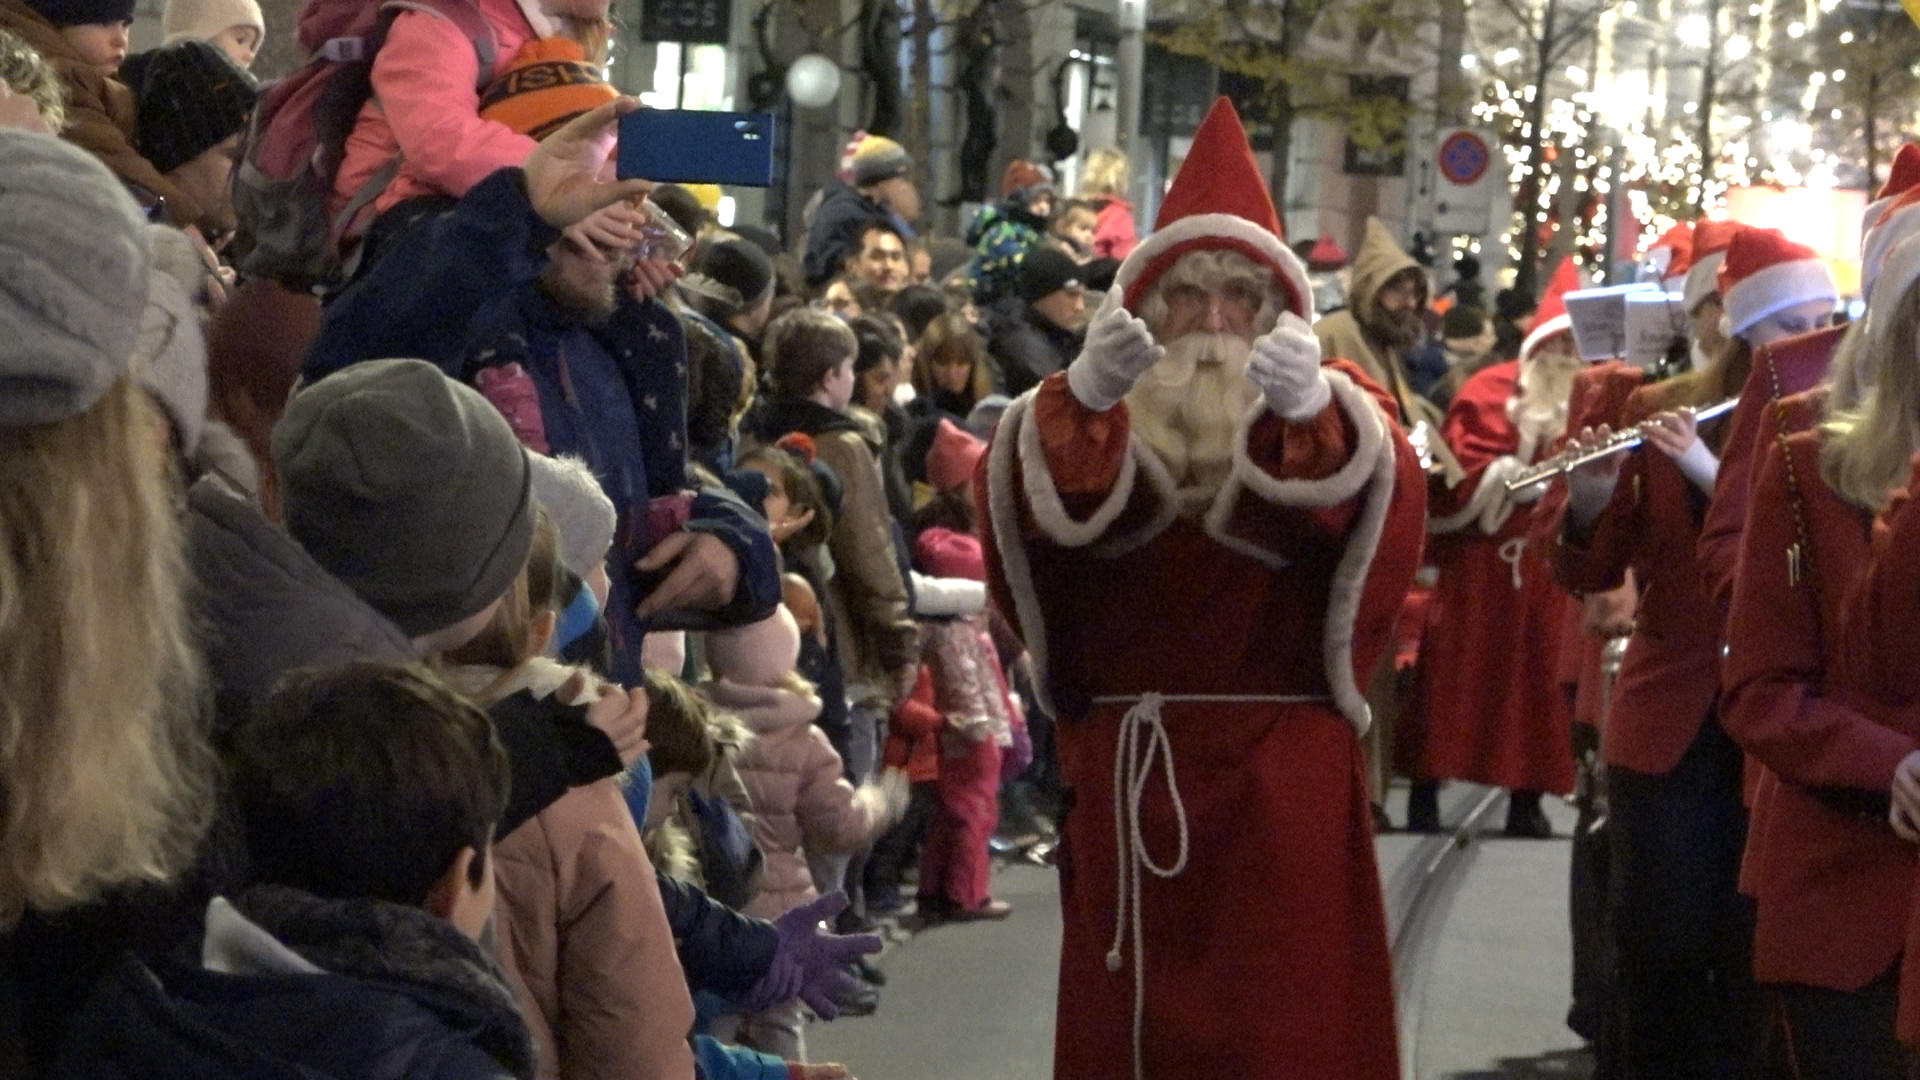 Samichlaus in the middle of the street